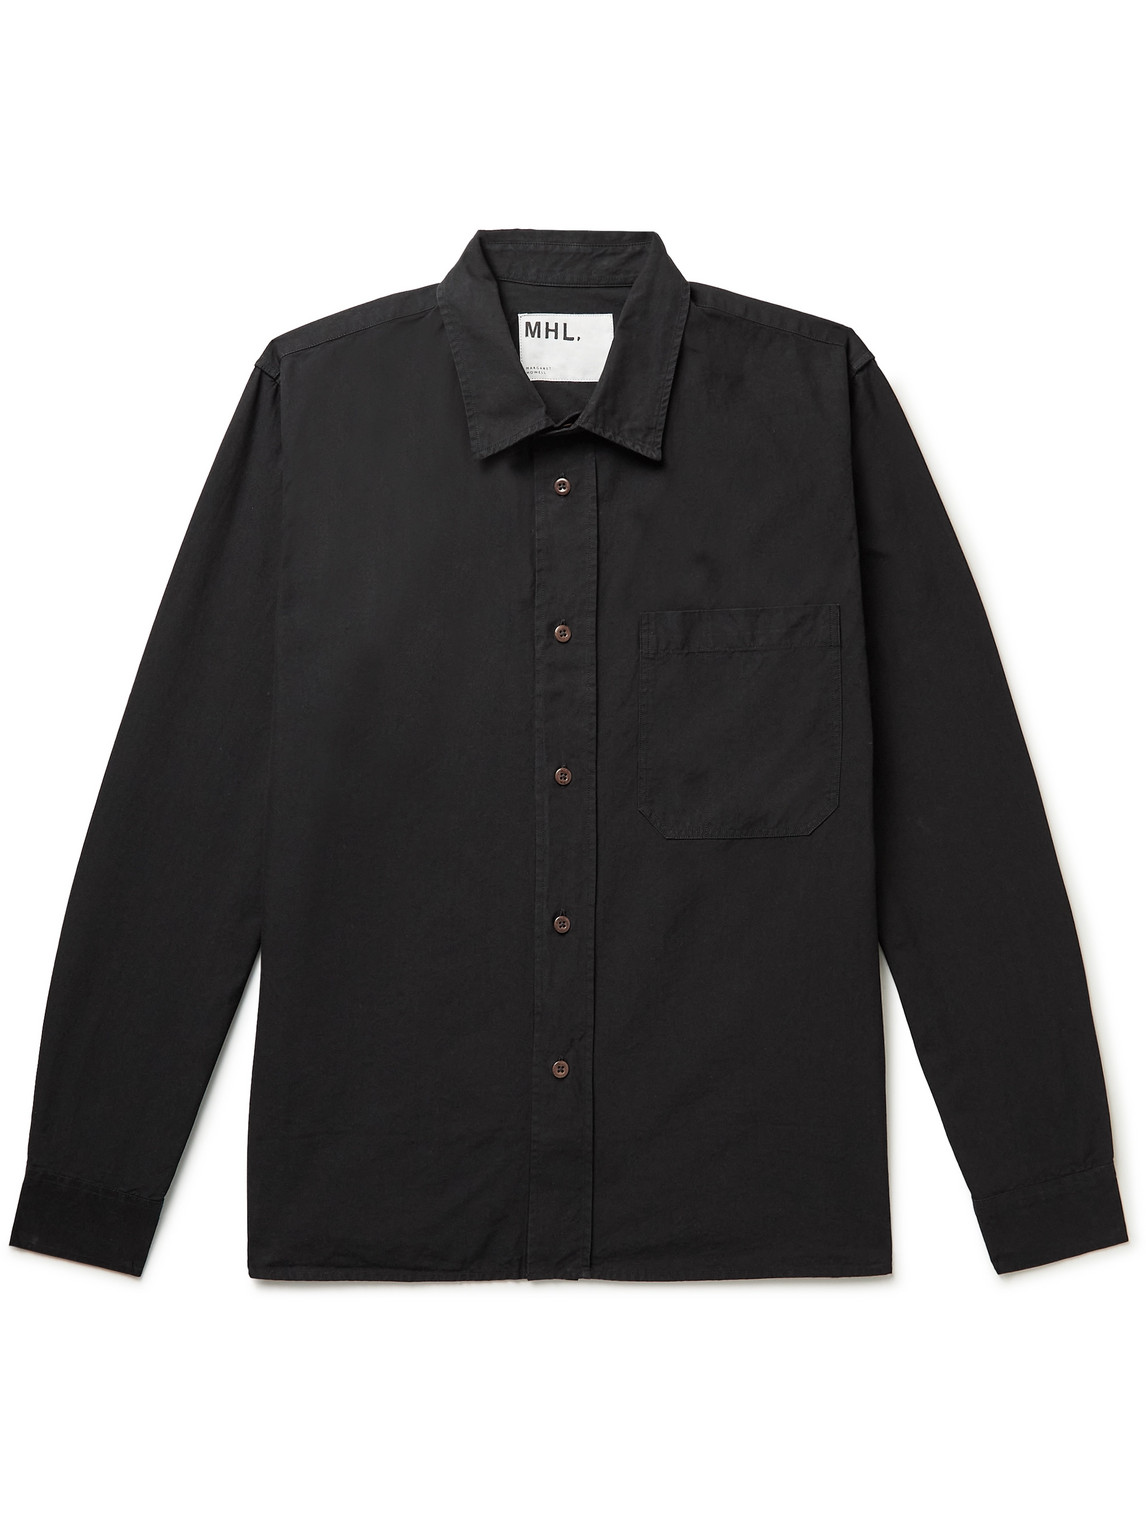 Margaret Howell Mhl Painters Cotton Oxford Shirt In Black